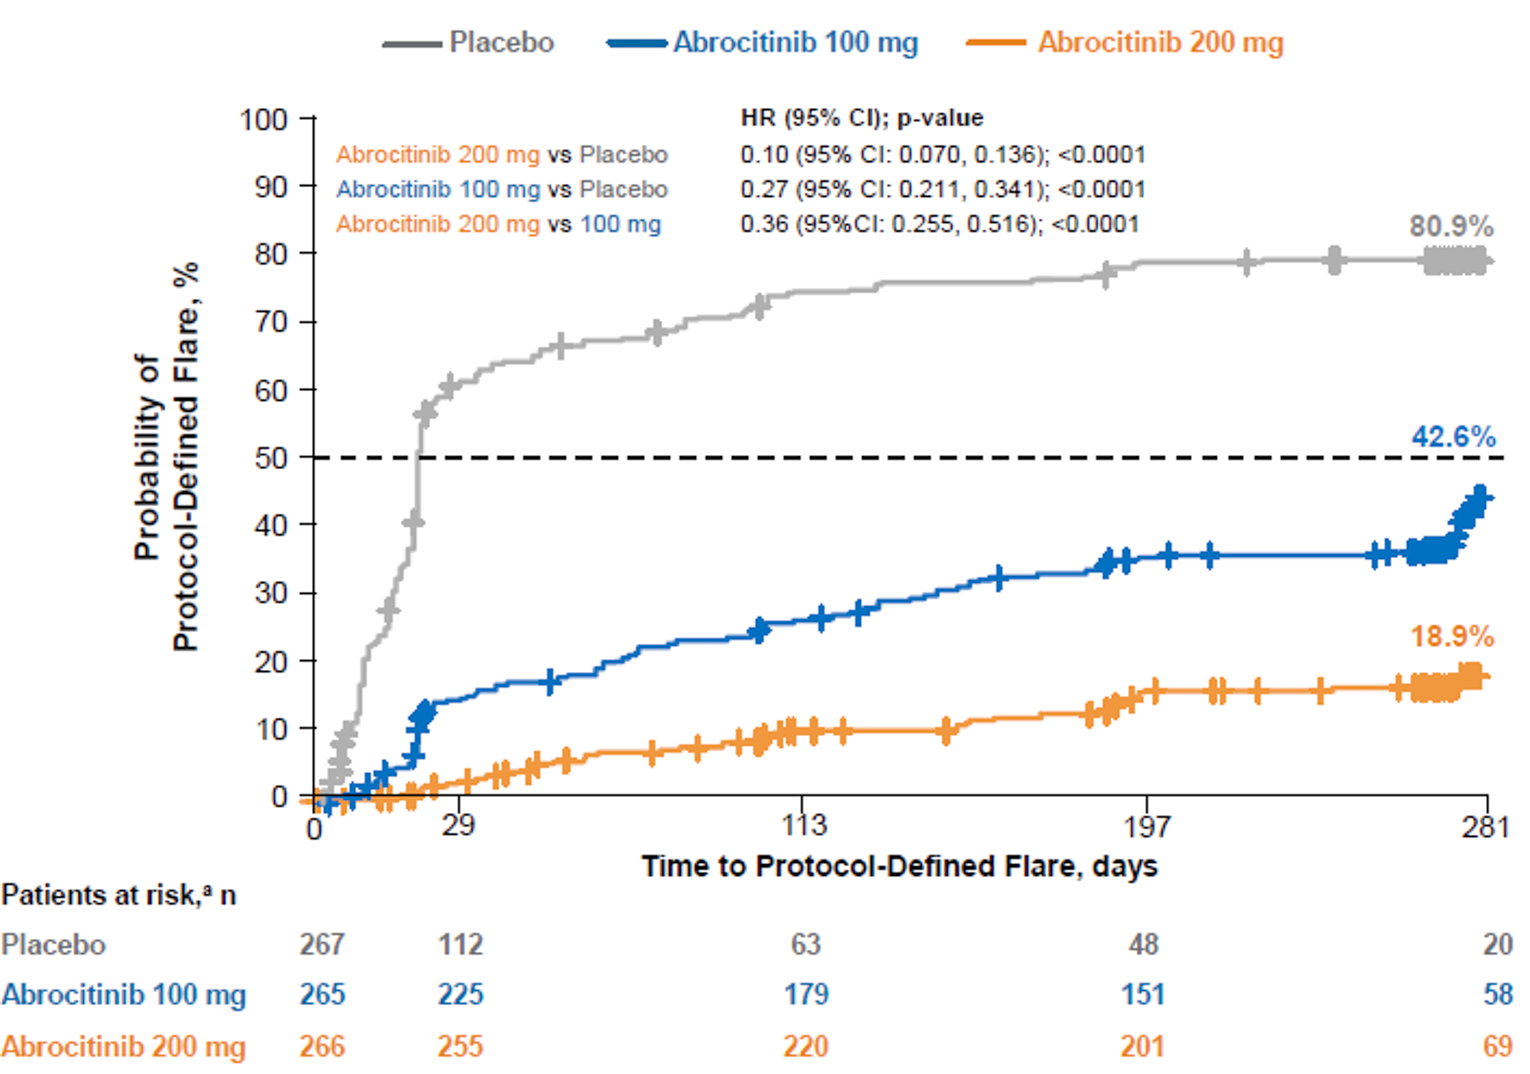 Time to protocol-defined flare during the randomized maintenance period of the JADE REGIMEN trial. Compared with the placebo group, the risk of a protocol-defined flare during the maintenance period was statistically significantly reduced in the abrocitinib 100 mg once daily group (HR = 0.27; 95% CI, 0.211 to 0.341; P < 0.0001) and abrocitinib 200 mg once daily group (HR = 0.10; 95% CI, 0.070 to 0.136; P < 0.0001).